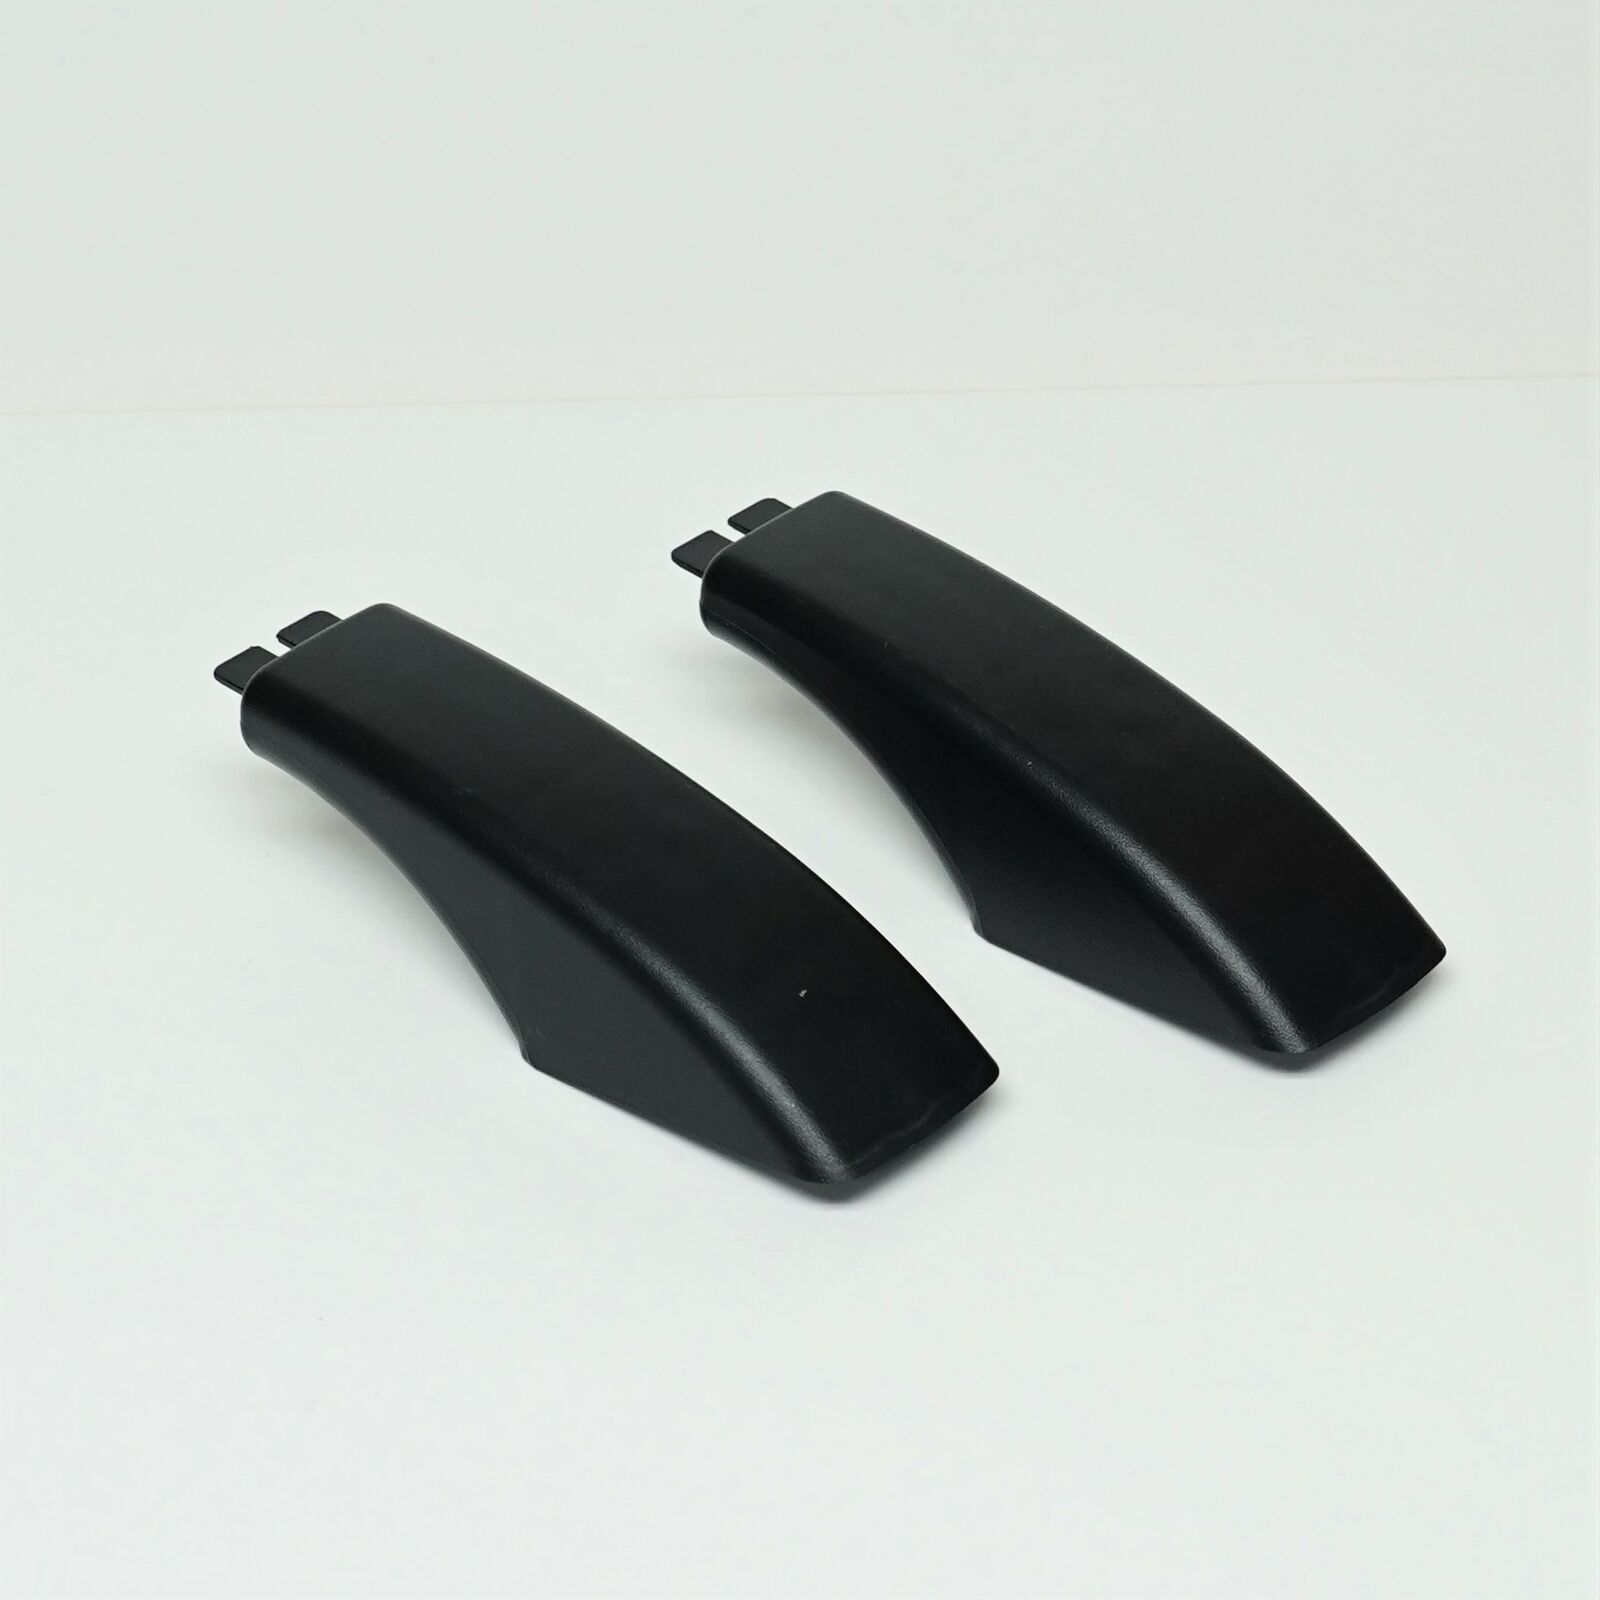 Choice 2 PACK of WB07X10034 for GE Range Oven Door Handle Black End Cap